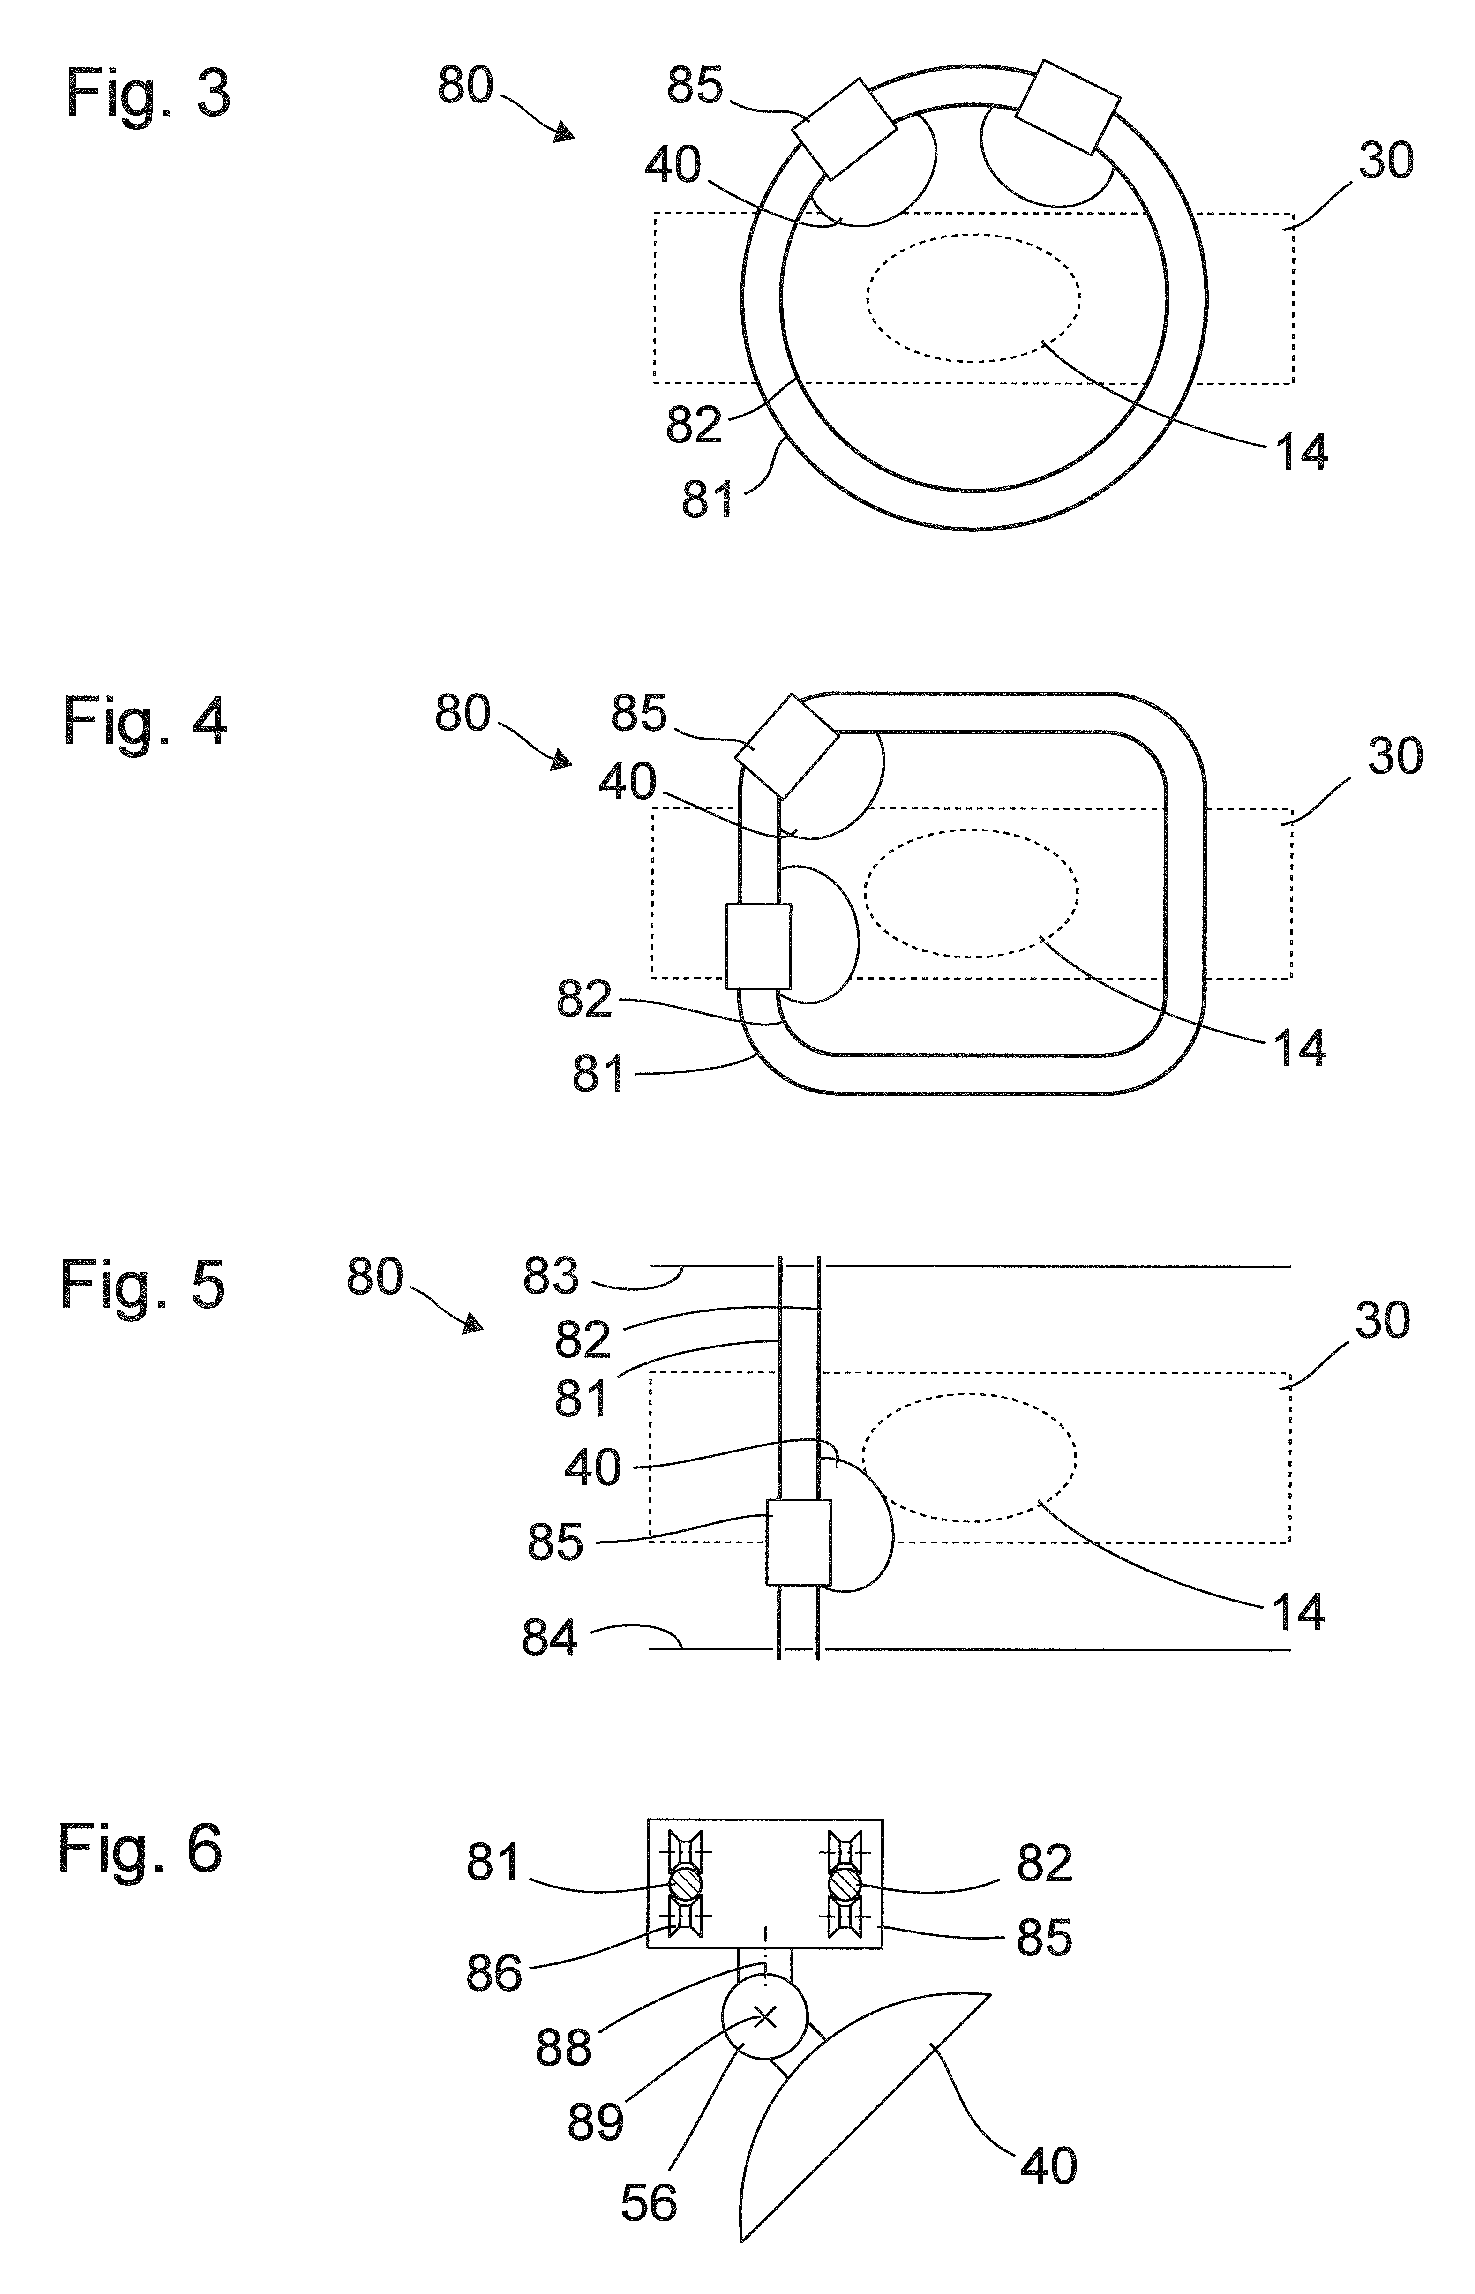 Control system and method to operate an operating room lamp